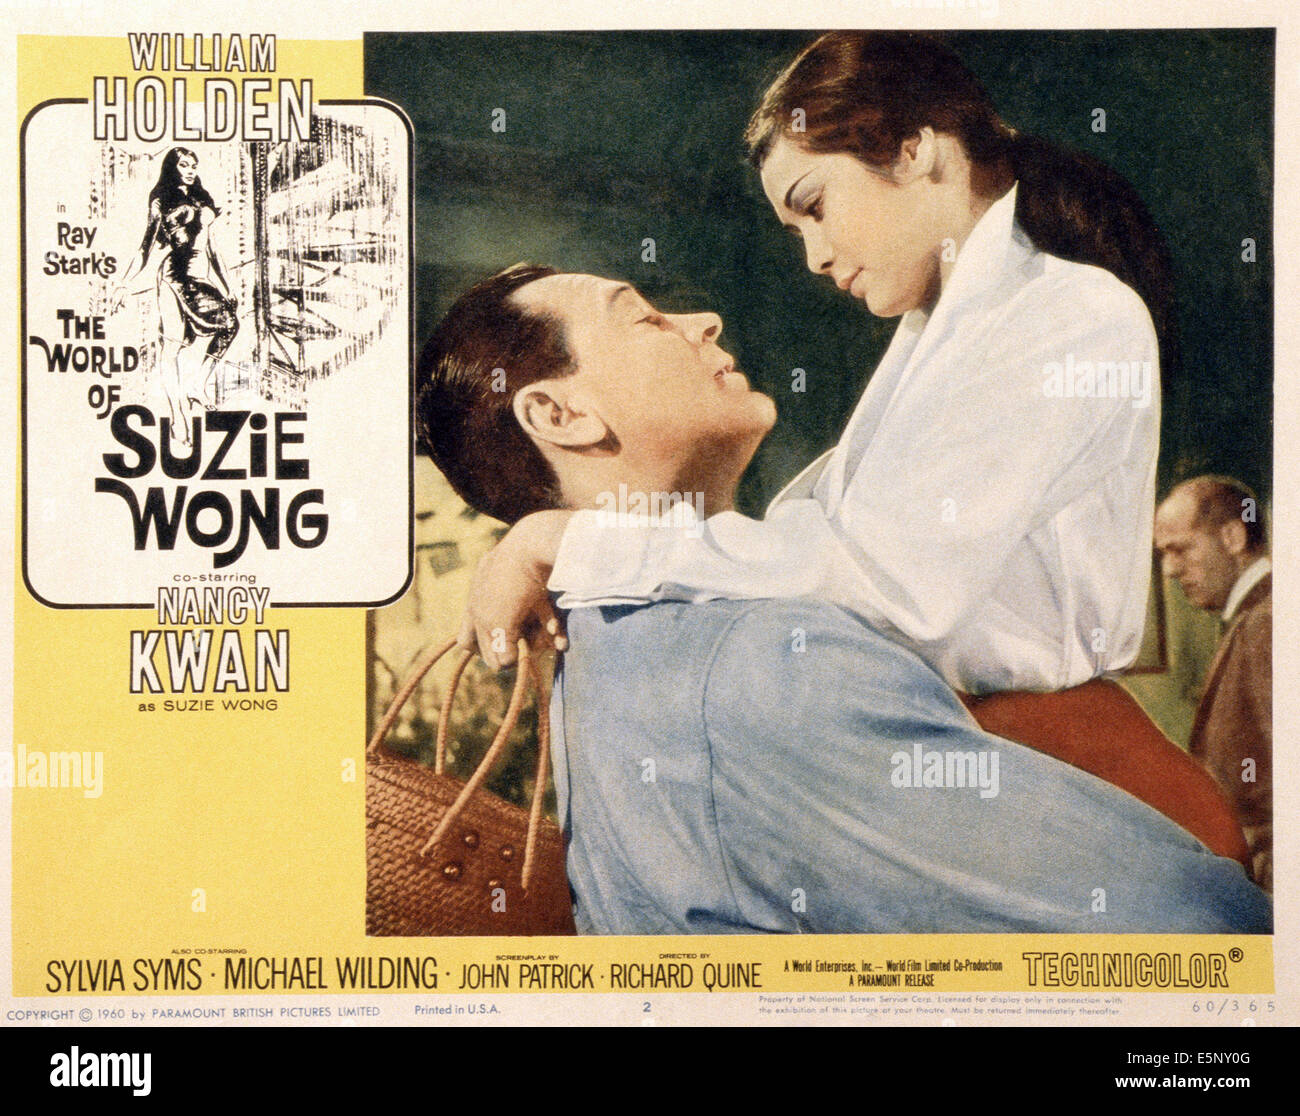 THE WORLD OF SUZIE WONG, US lobbycard, from left: William Holden, Nancy Kwan, 1960 Stock Photo